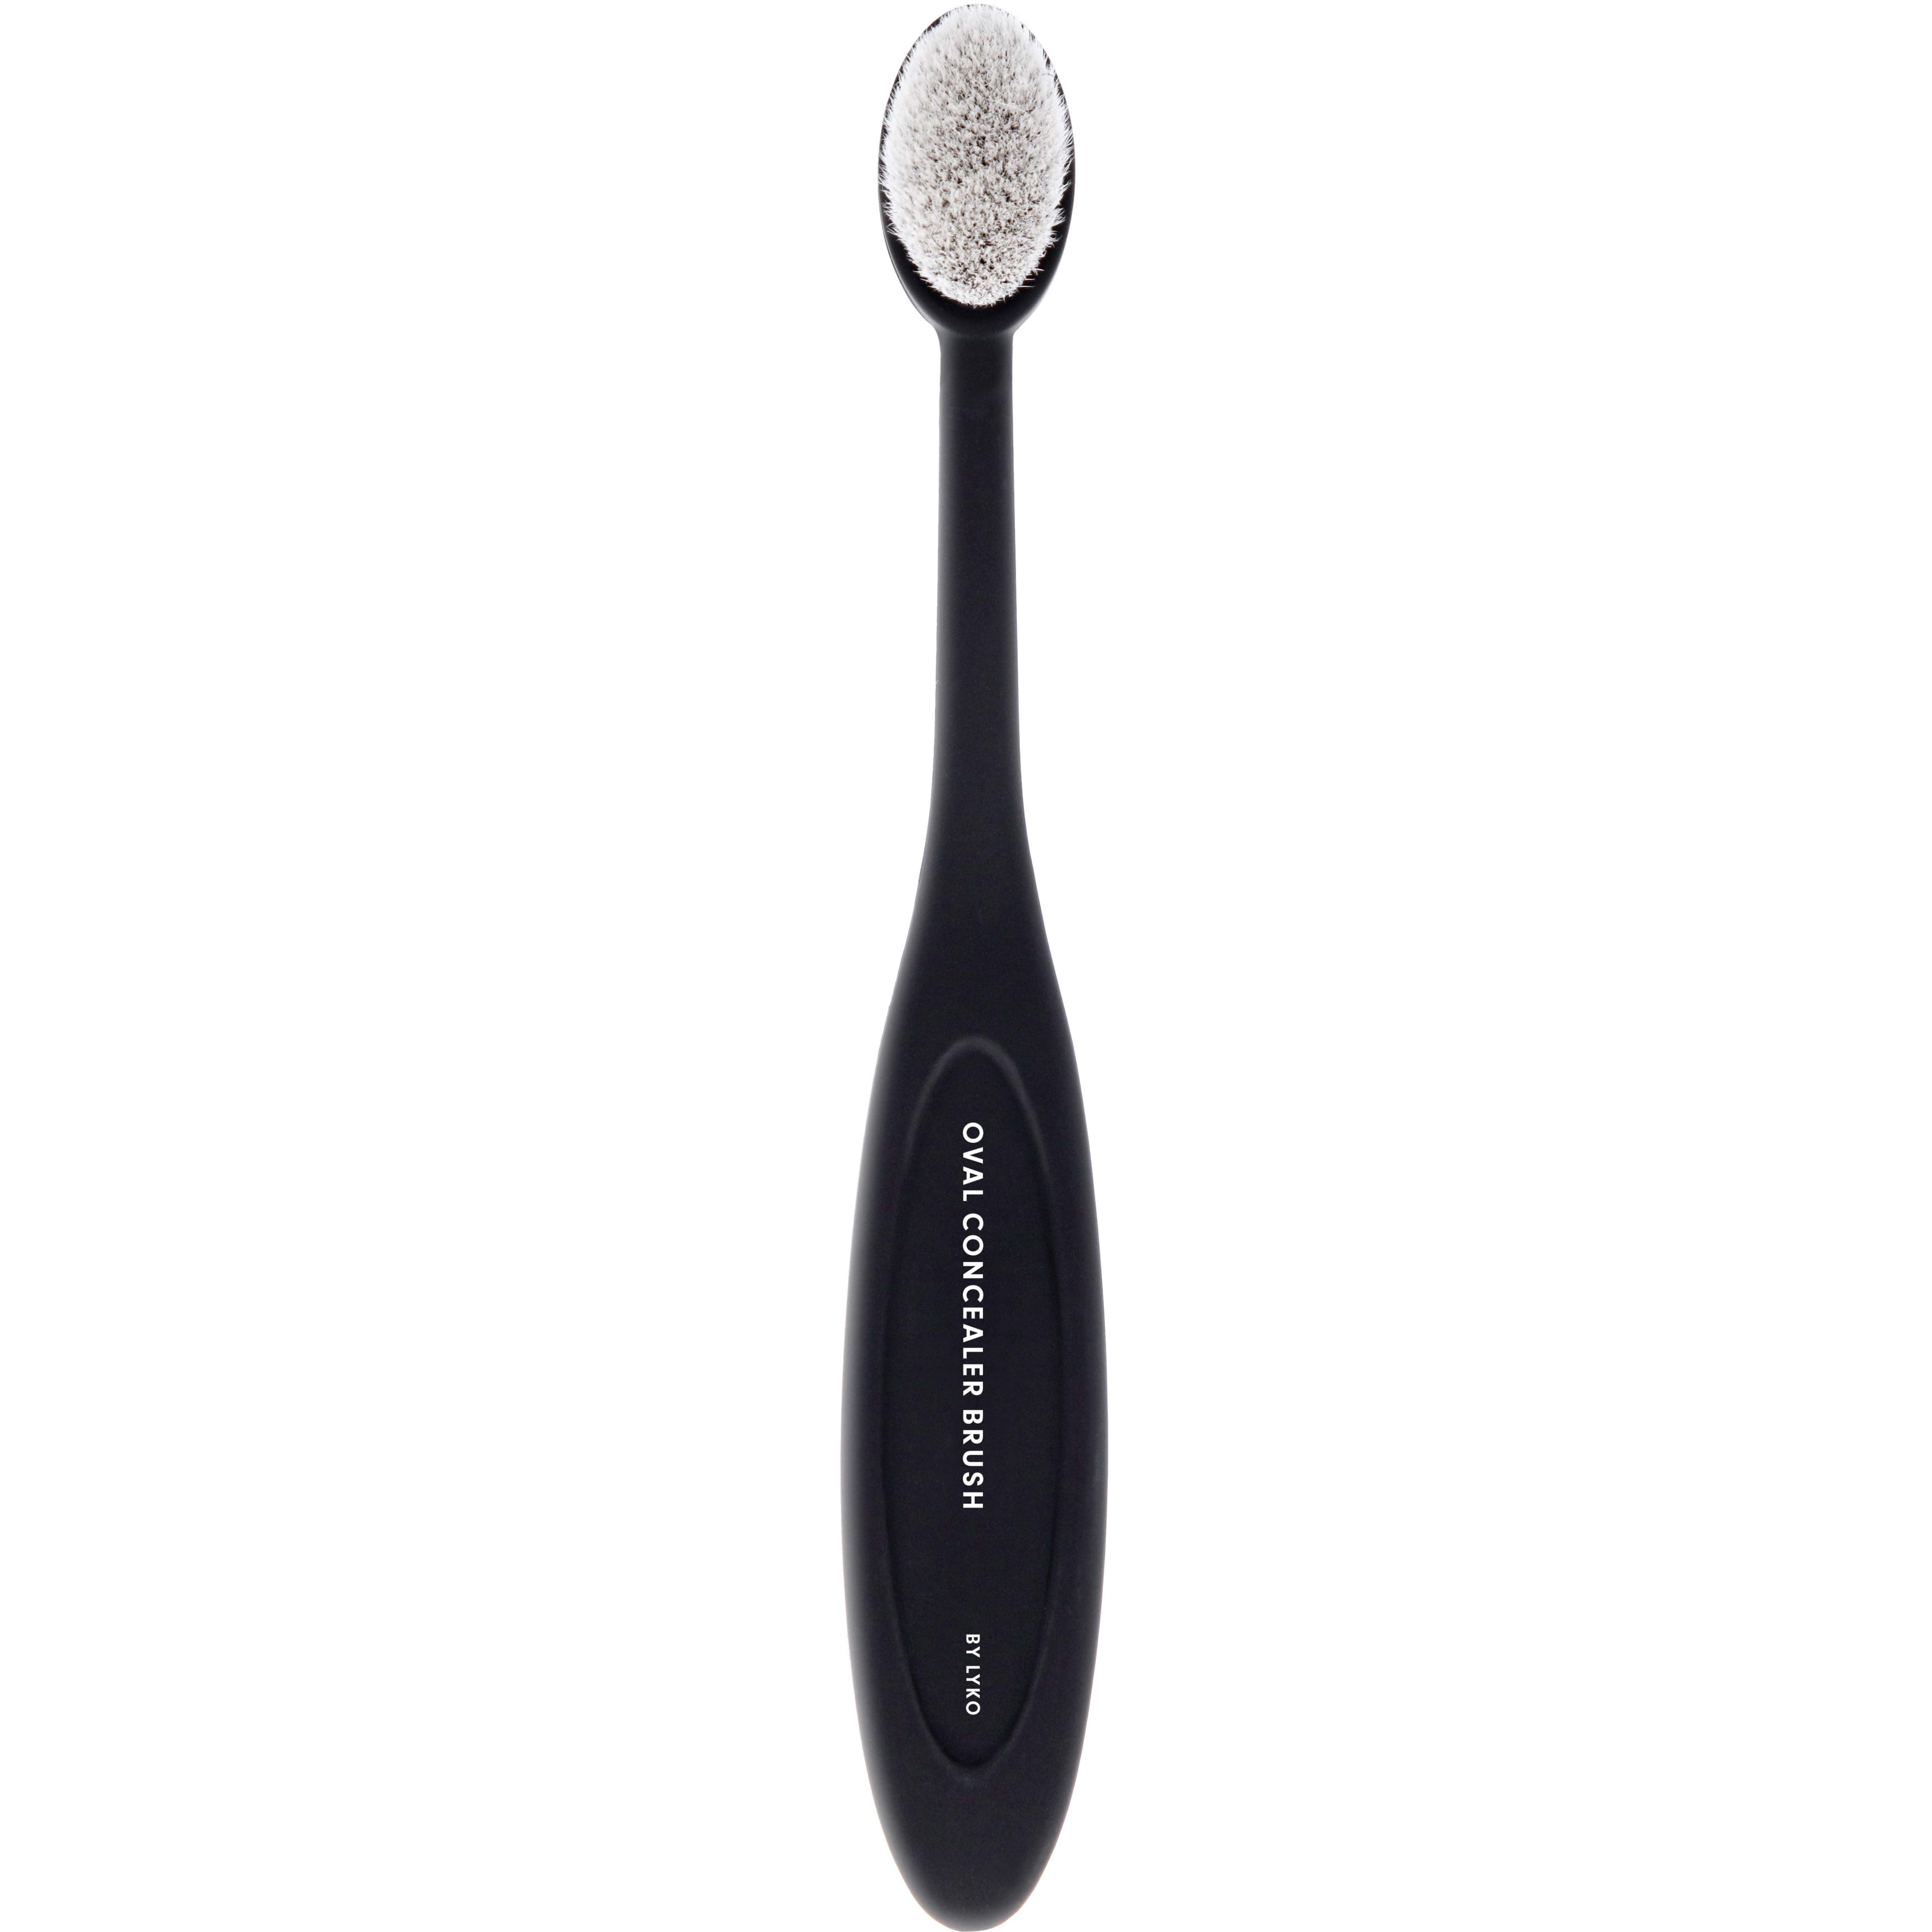 By Lyko Oval Concealer Brush